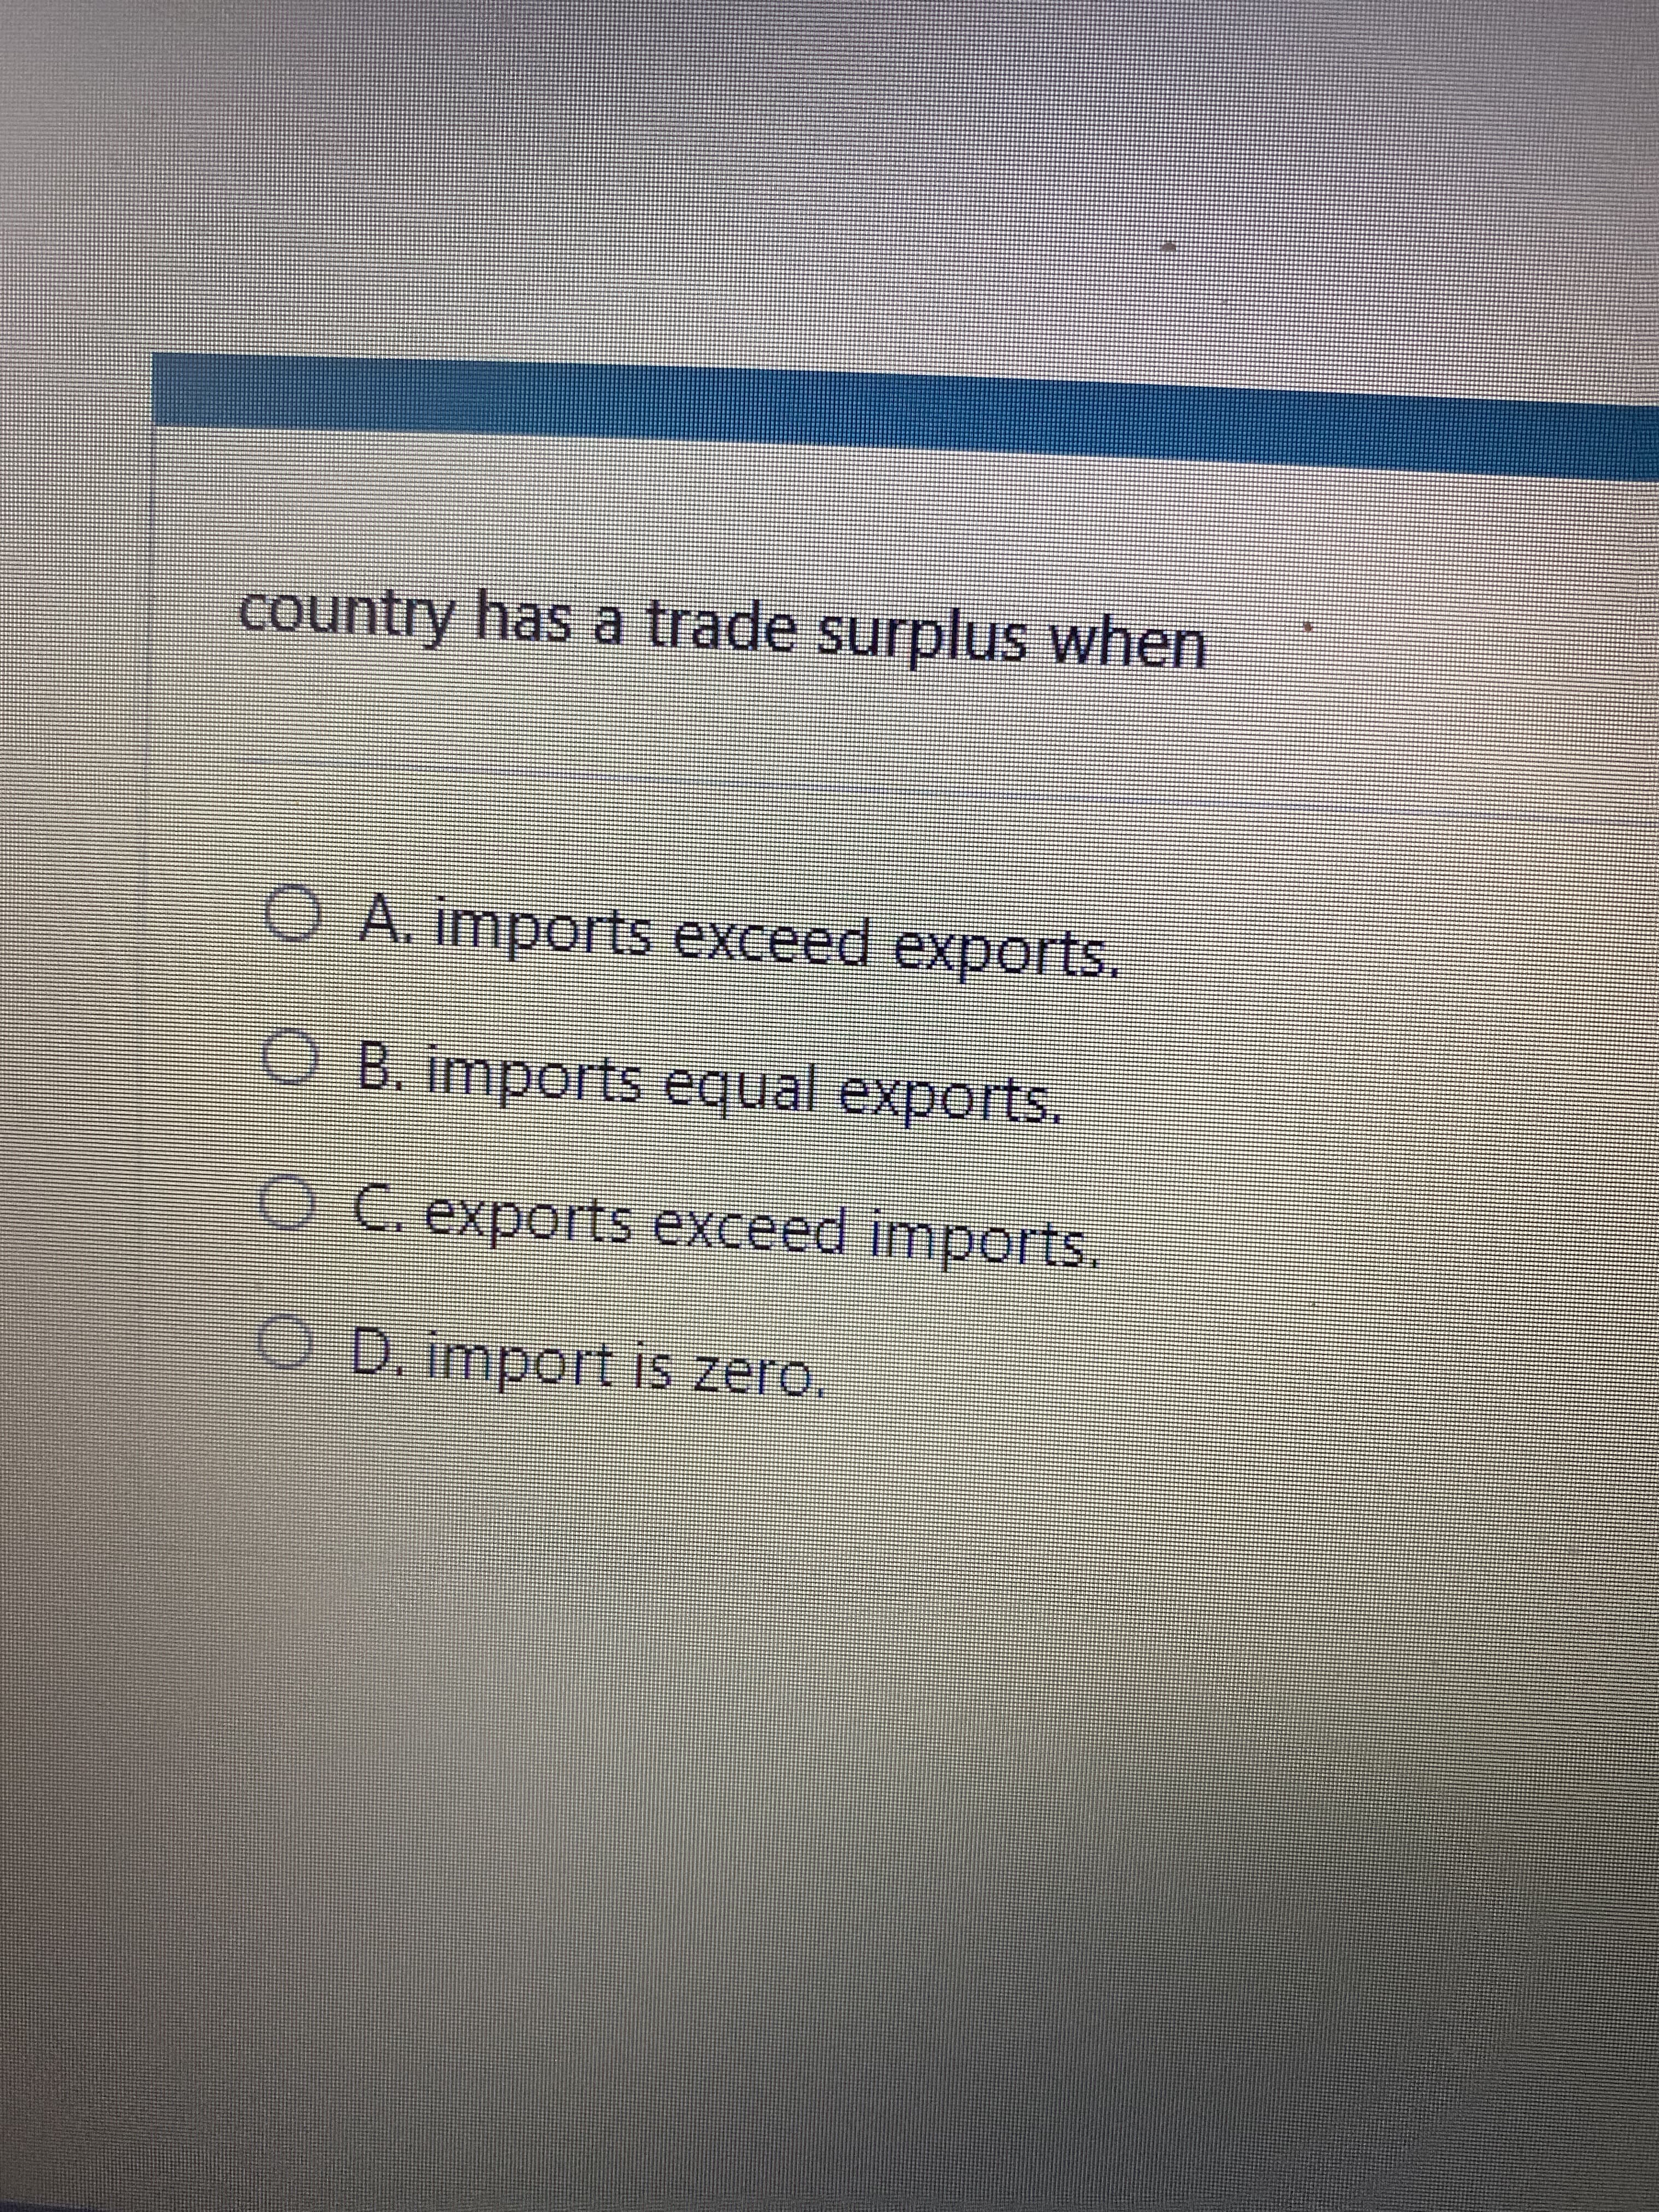 country has a trade surplus when
